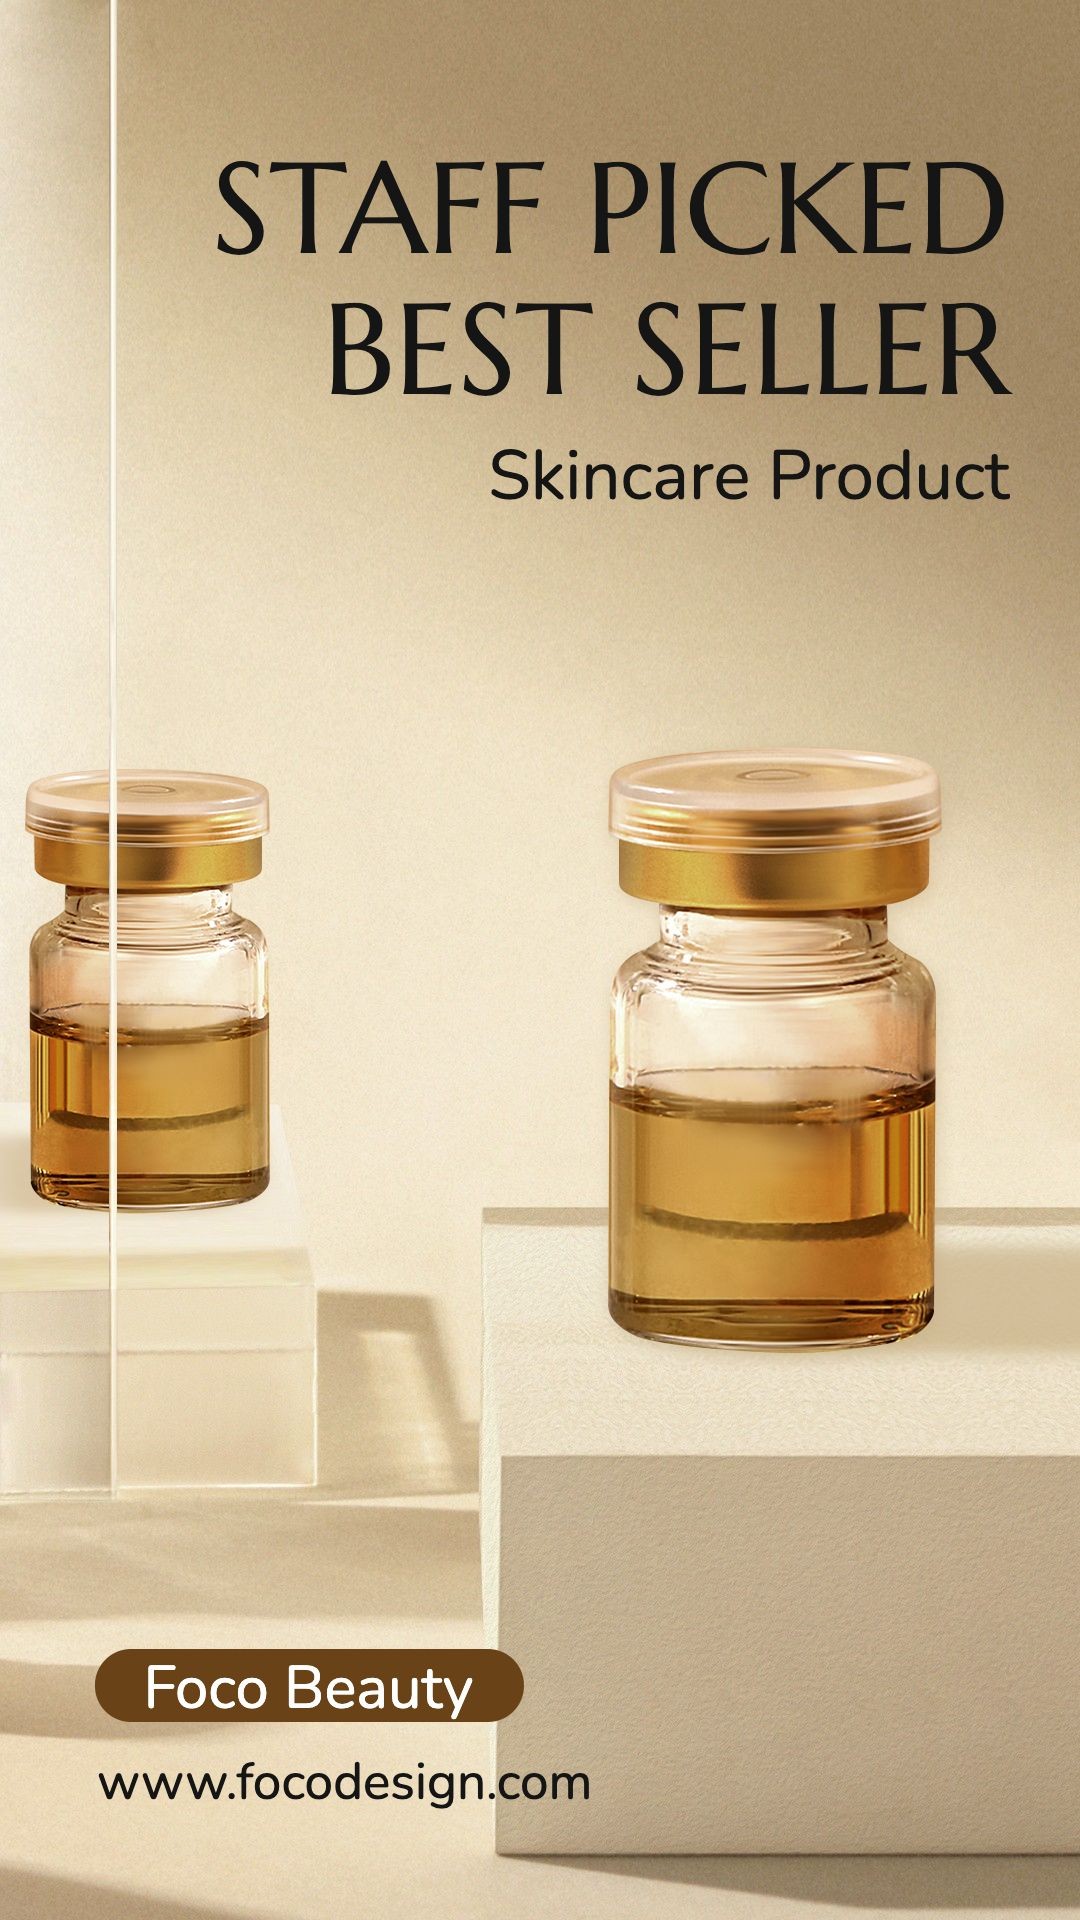 Light Element Skincare Personal Care Promo Display Ecommerce Story预览效果